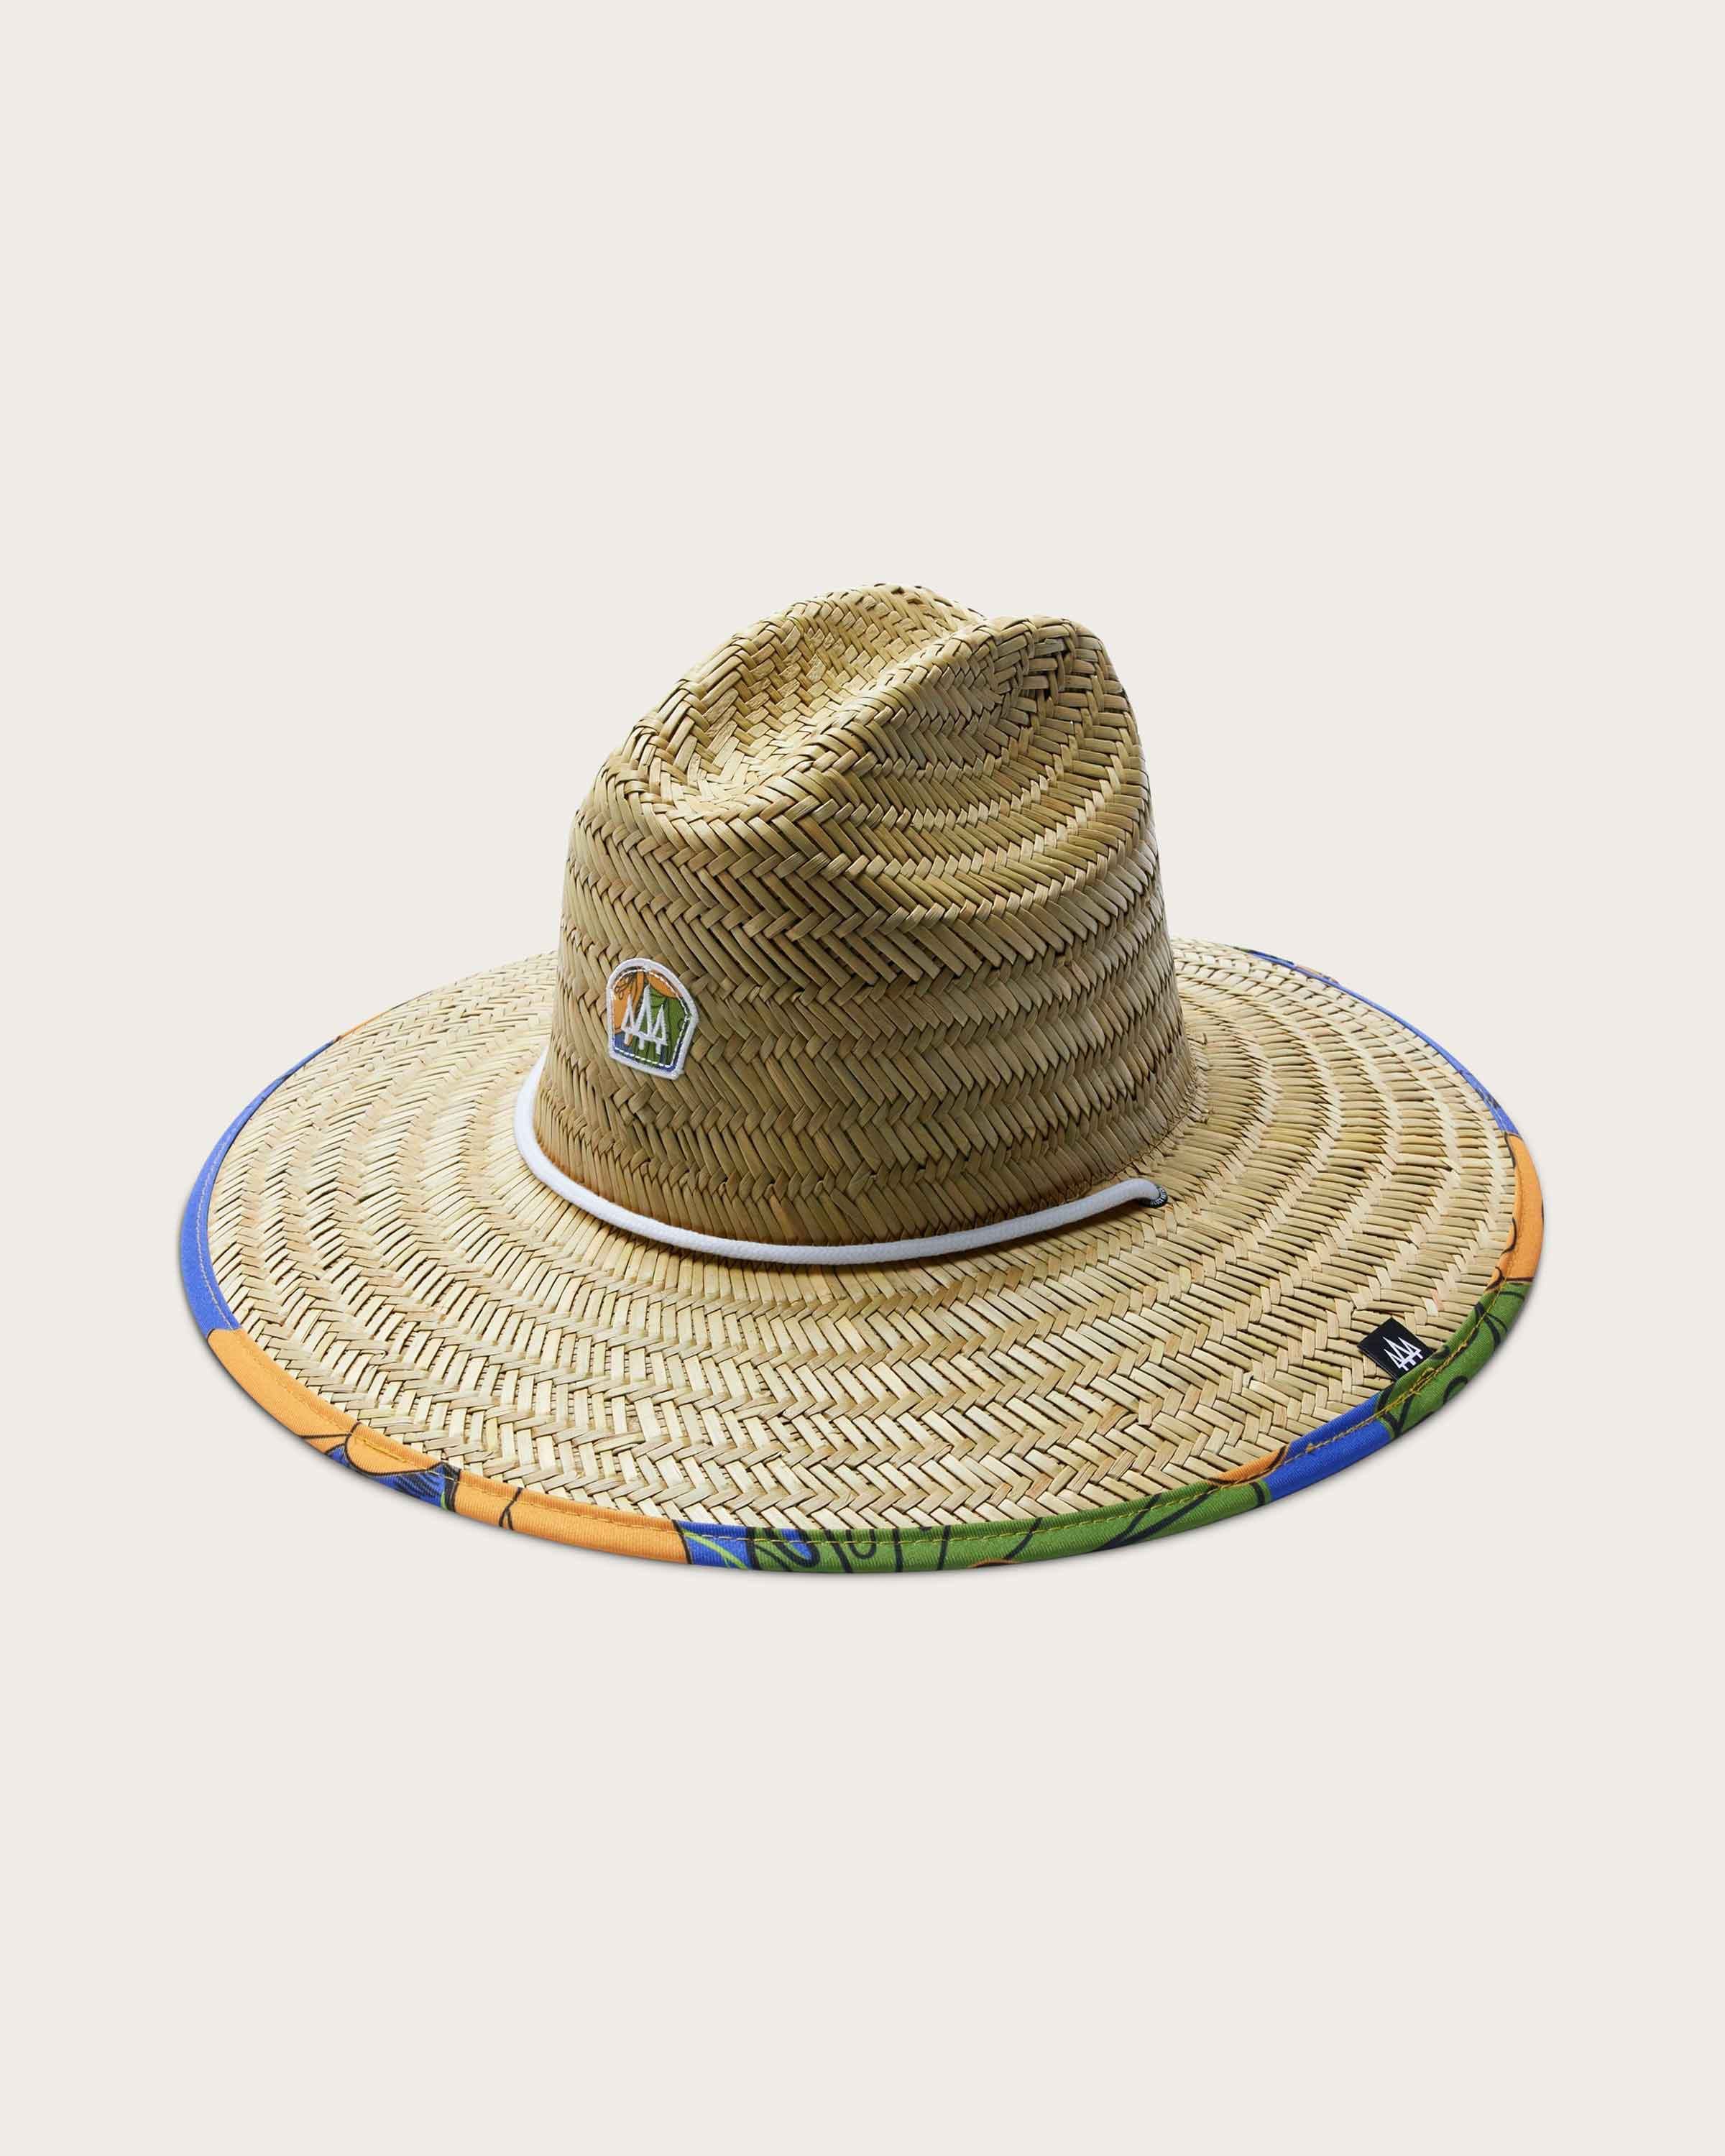 Andy - undefined - Hemlock Hat Co. Lifeguards - Adults